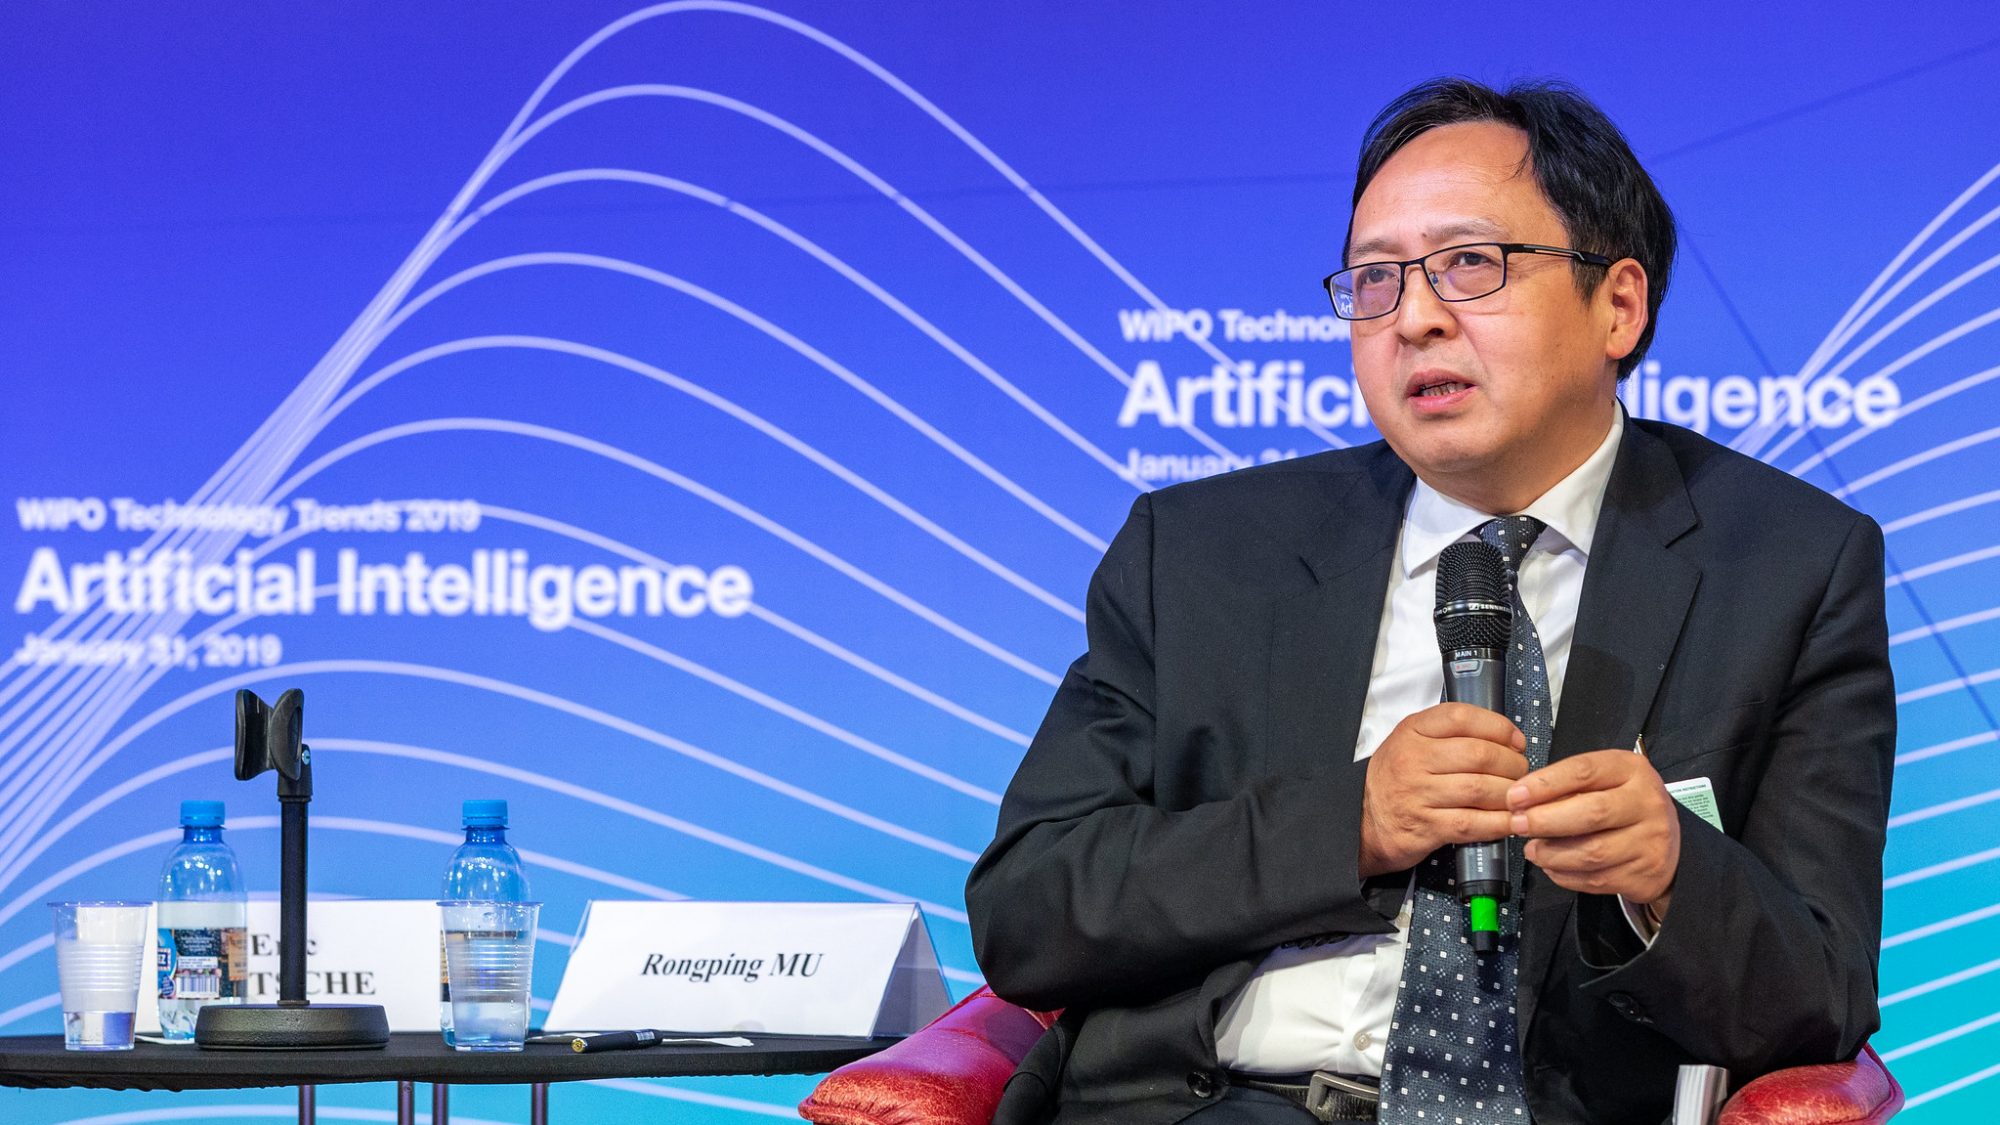 Rongping Mu, Head of the Institutes of Sciences and Development in China, speaks at a panel discussion on artificial intelligence